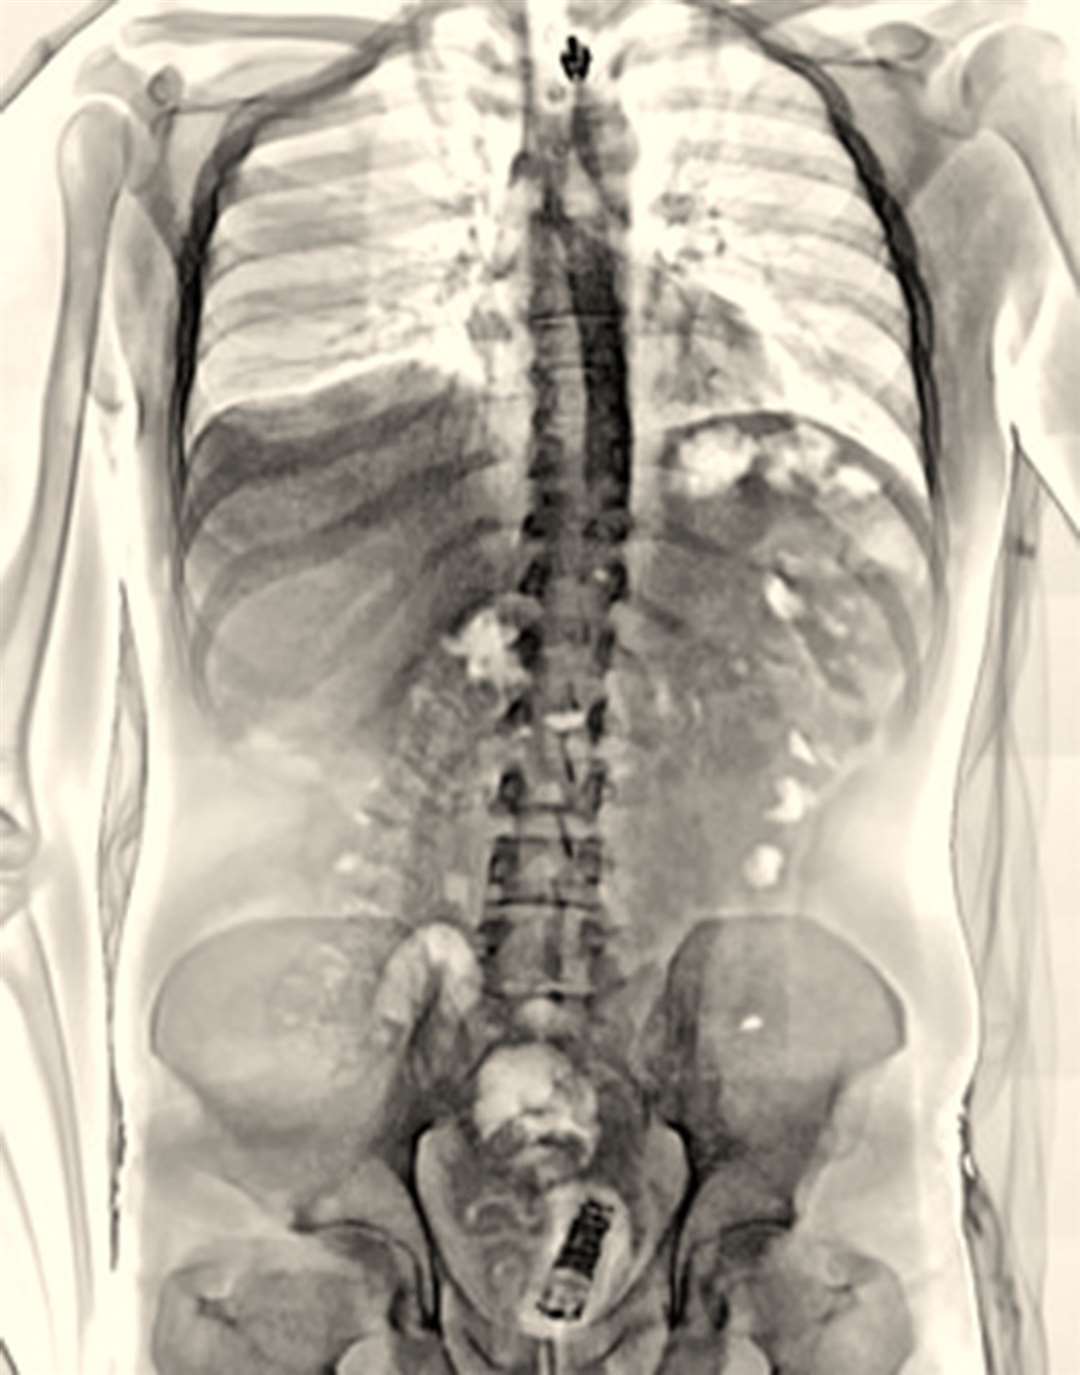 An X-ray body scan of a phone during an attempt to smuggle contraband behind bars (MoJ Handout/PA)